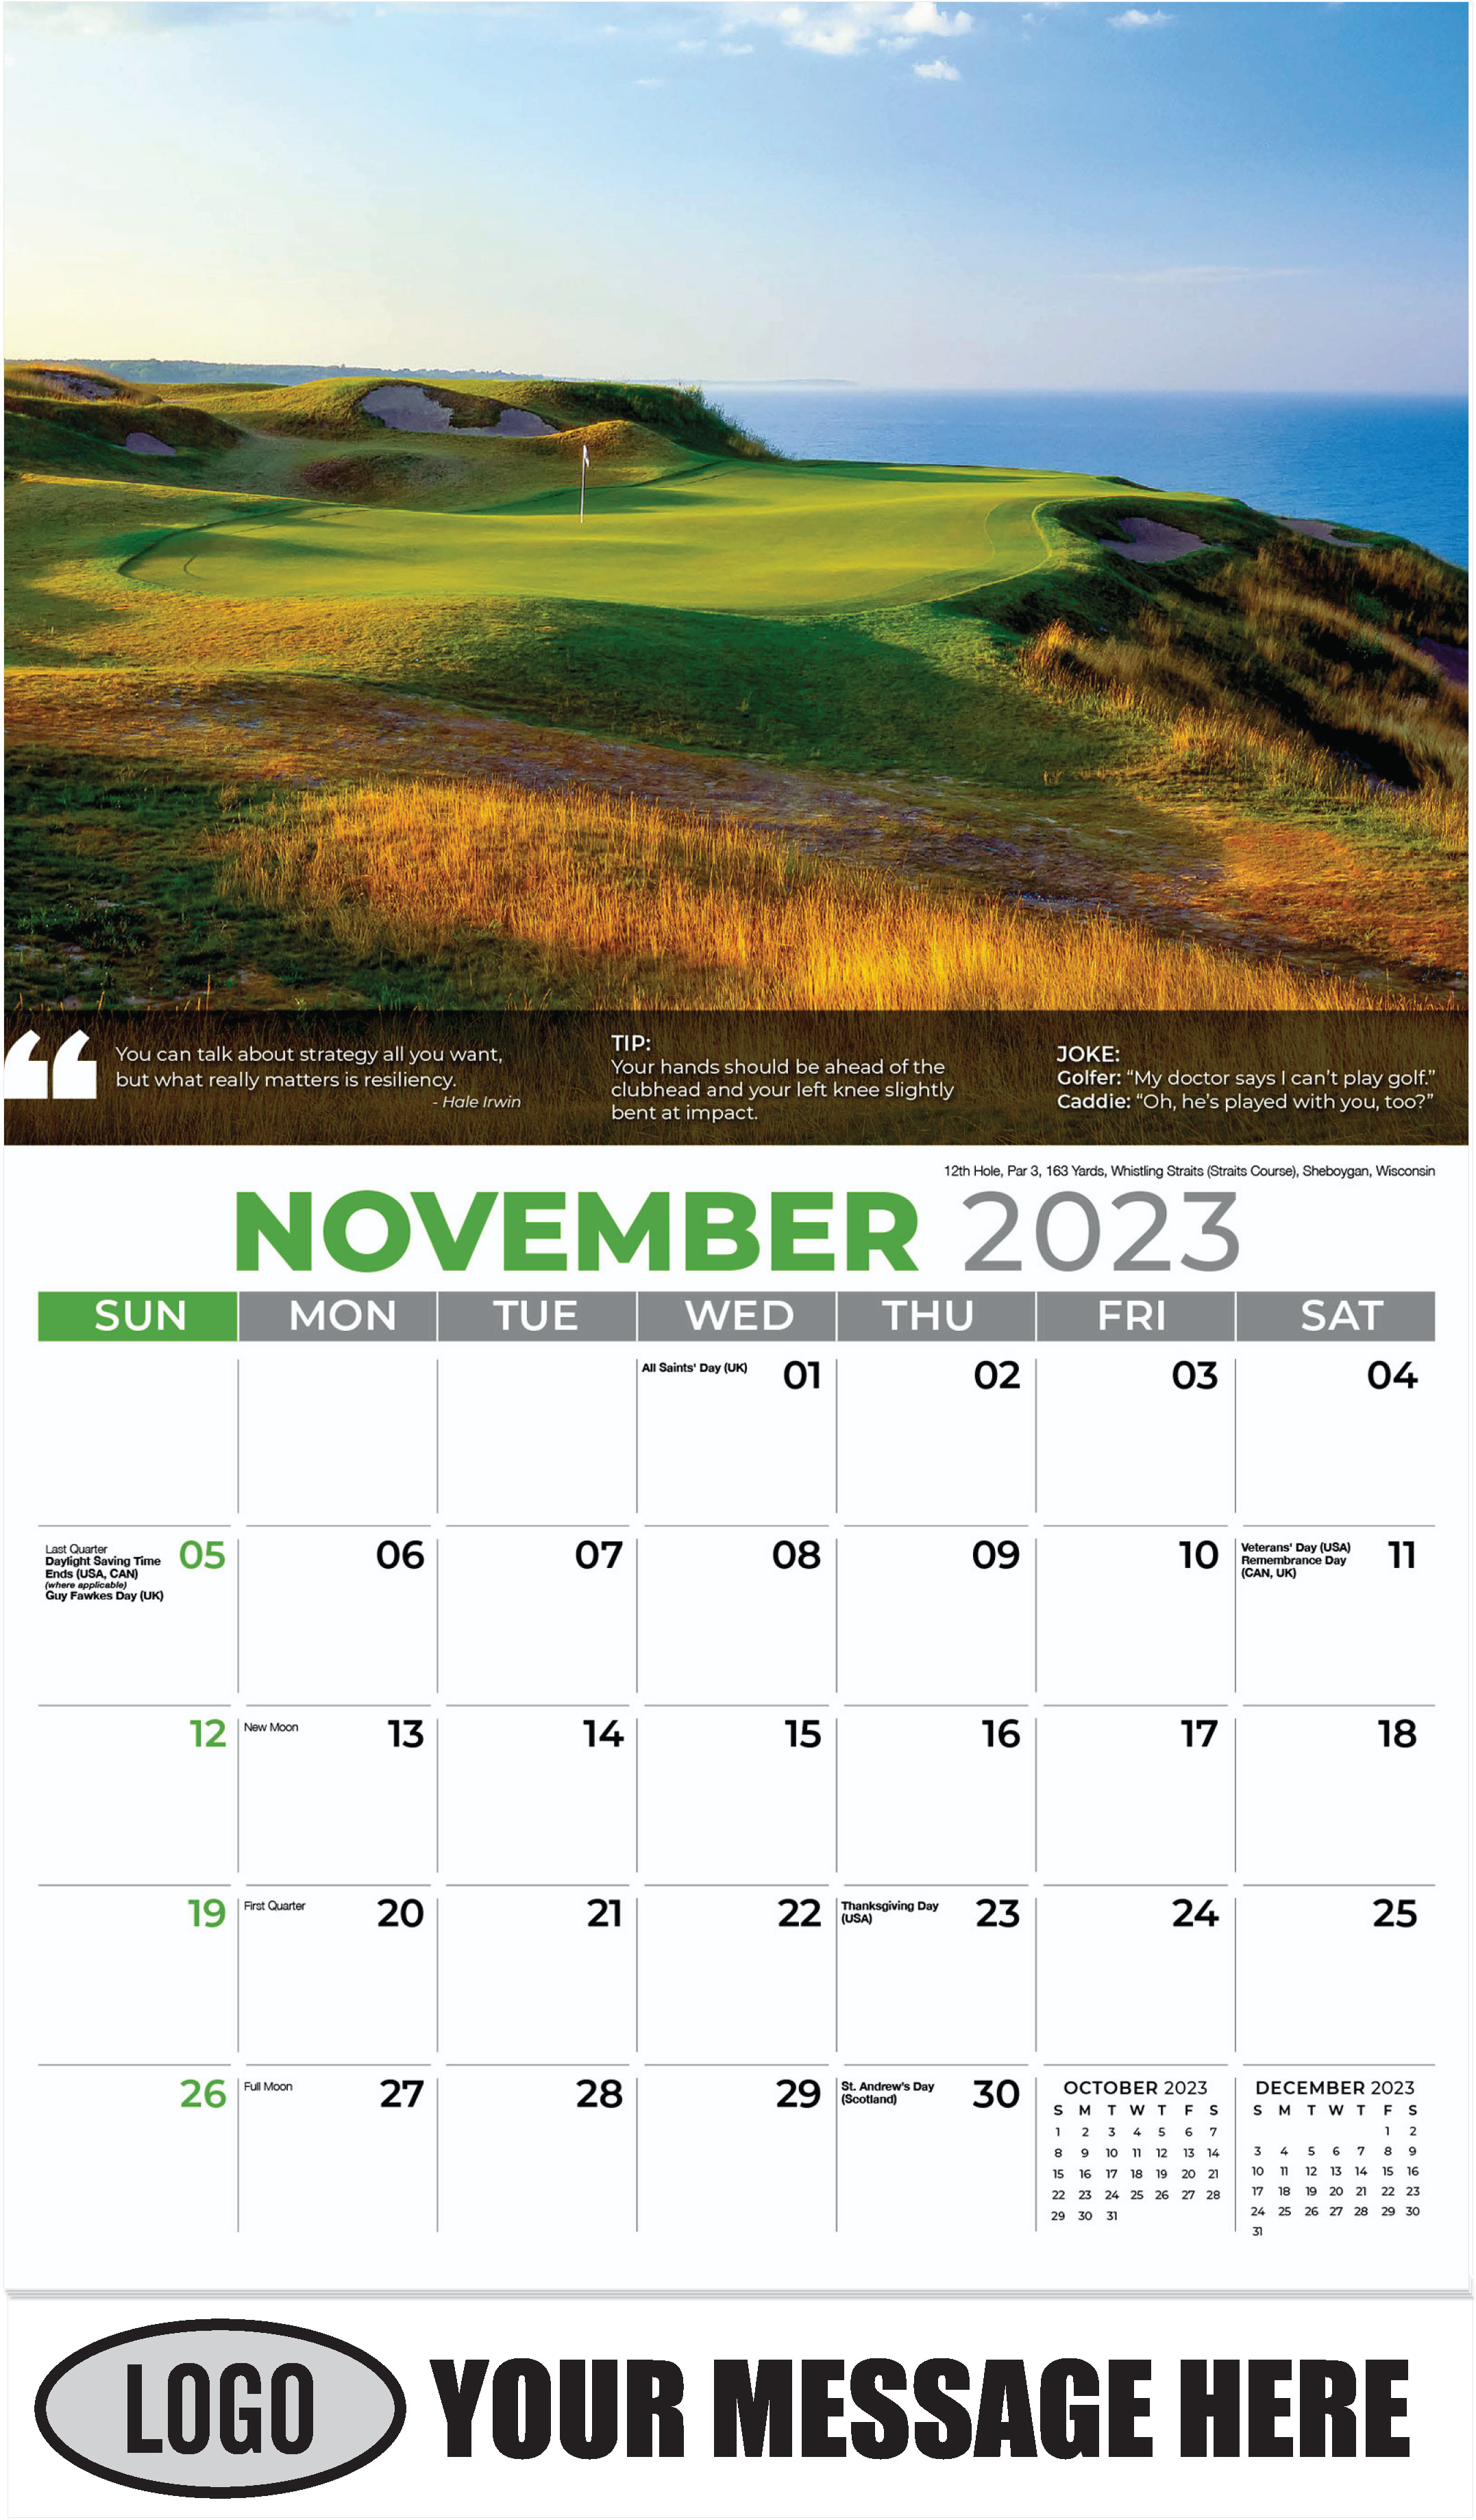 12th Hole, Par 3, 163 Yards, Whistling Straits (Straits Course), Sheboygan, Wisconsin
 - November - Golf Tips  (Tips, Quips and Holes) 2023 Promotional Calendar